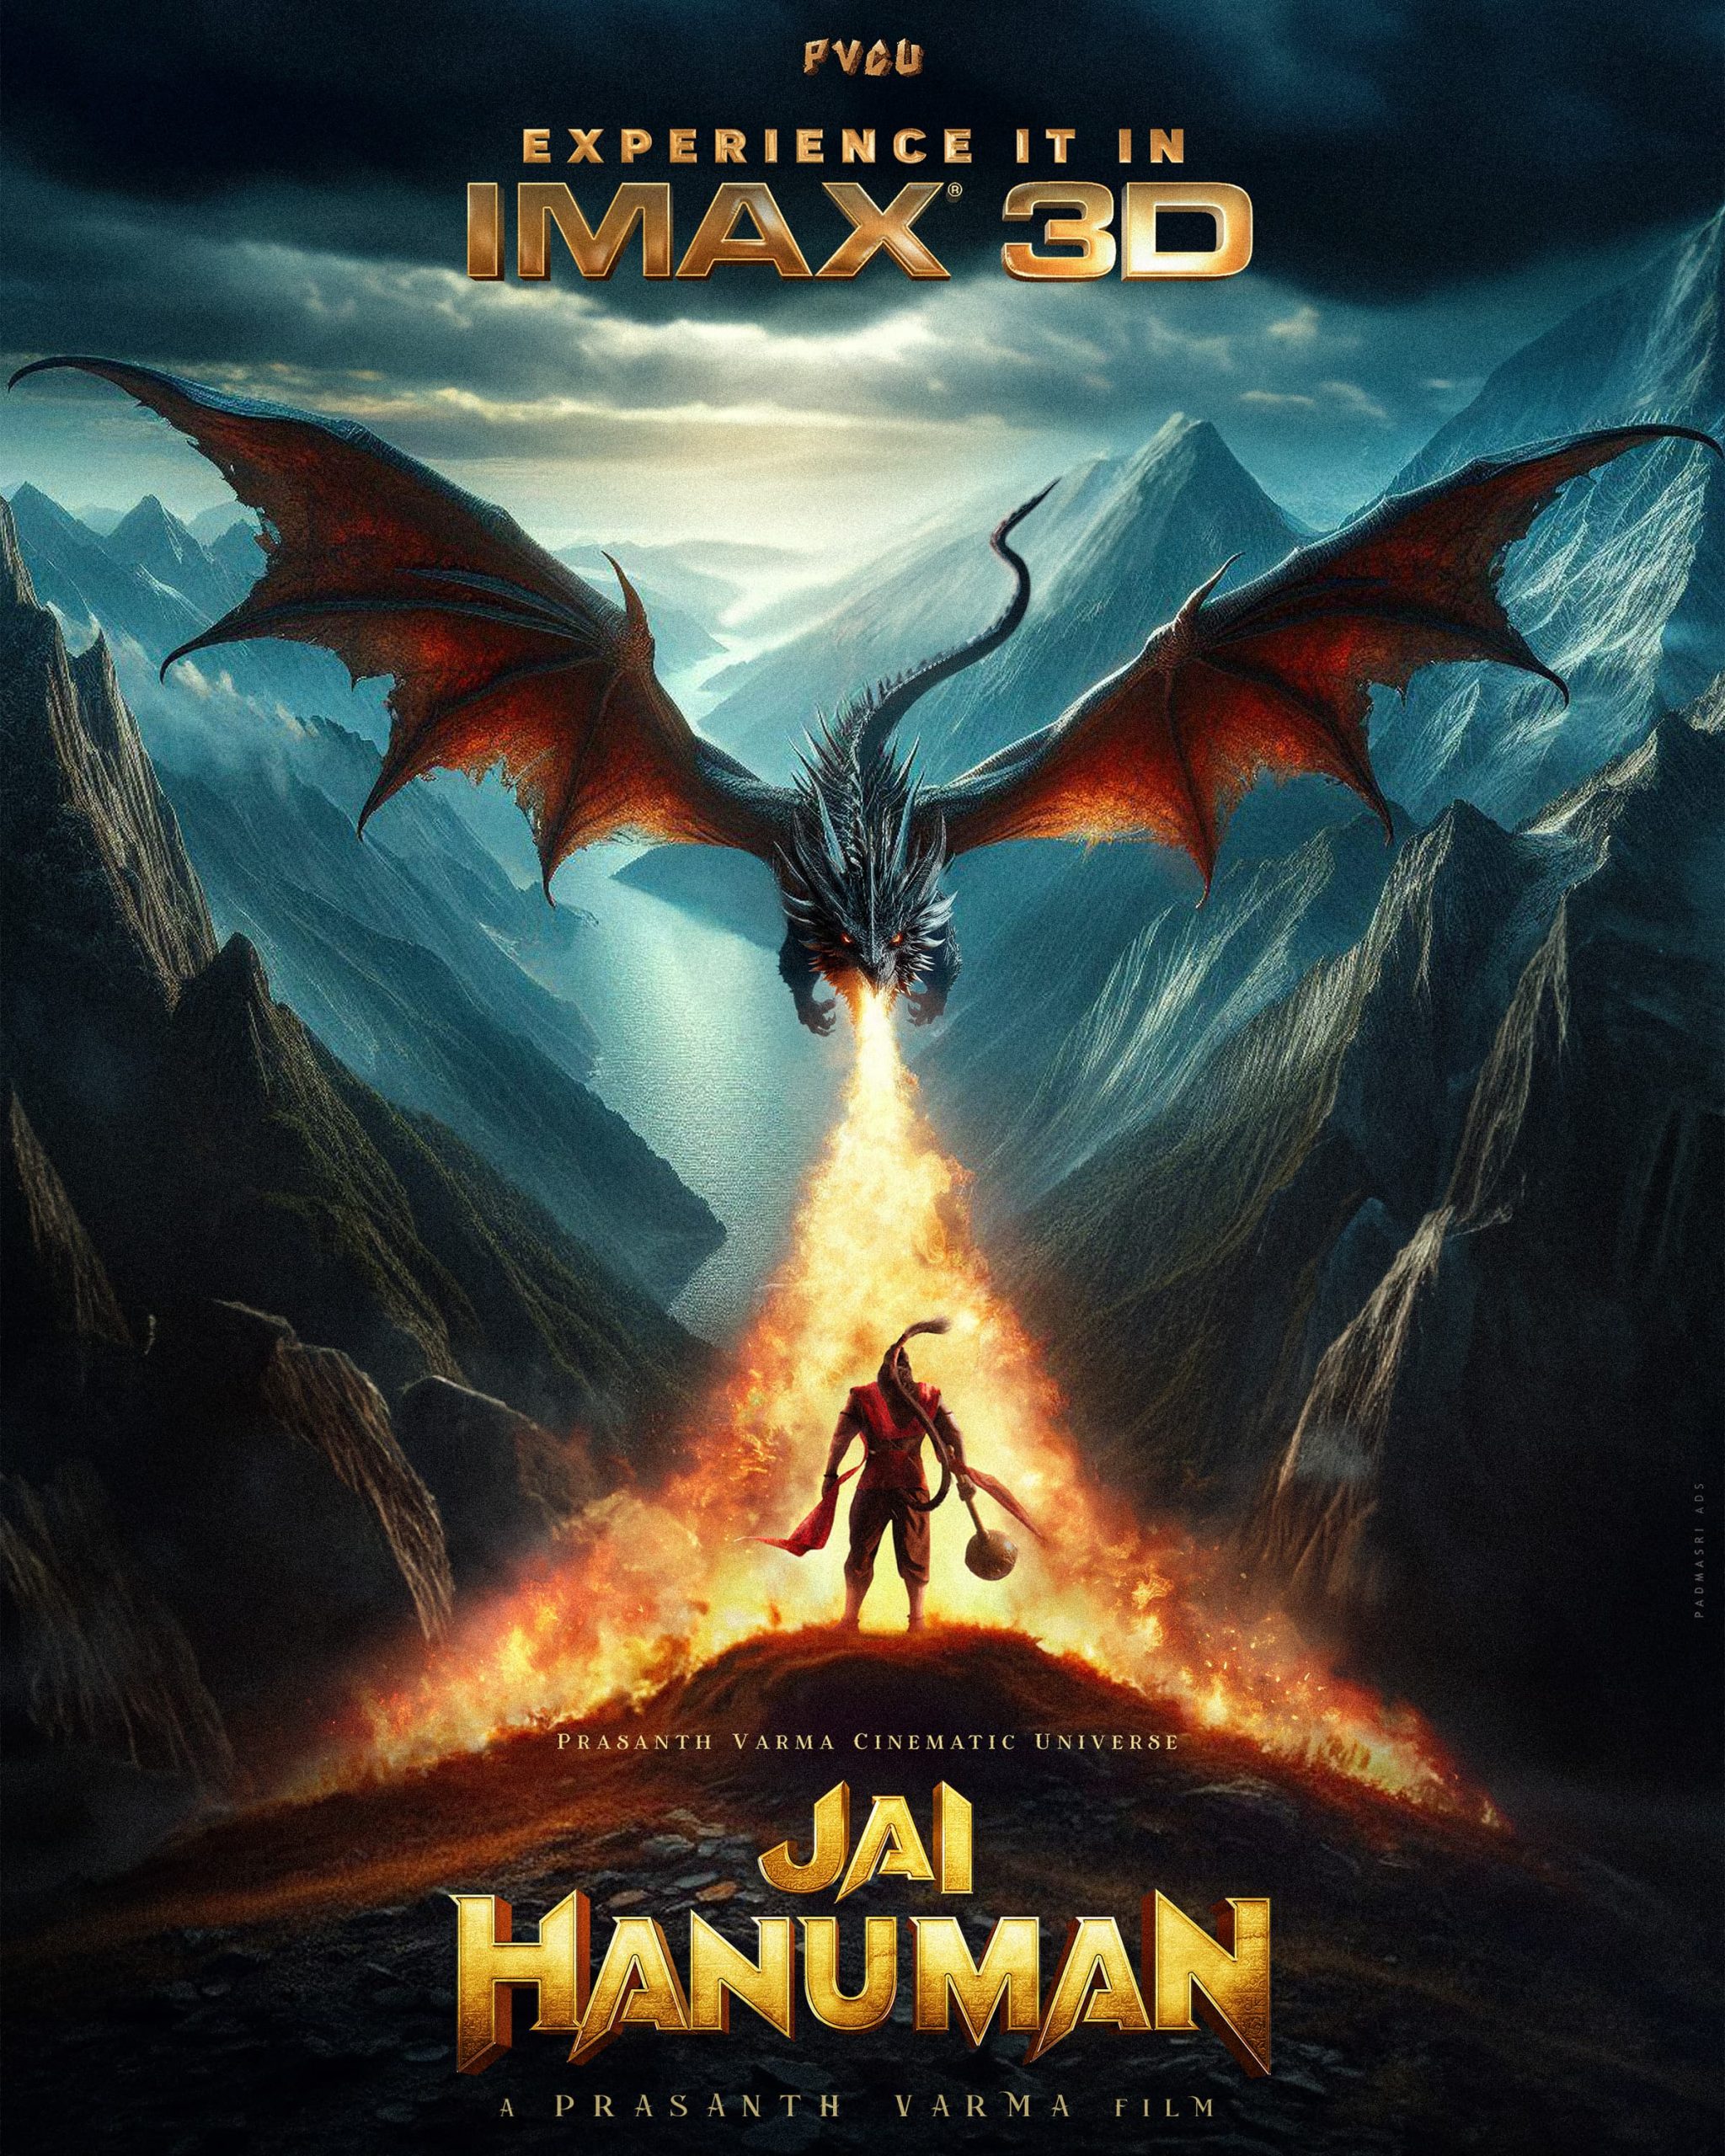 On The Occasion Of Hanuman Jayanthi, A Brand New Poster From The Visionary Prasanth Varma’s Epic Adventure Jai Hanuman From The PVCU Unveiled, Experience It In IMAX 3D!